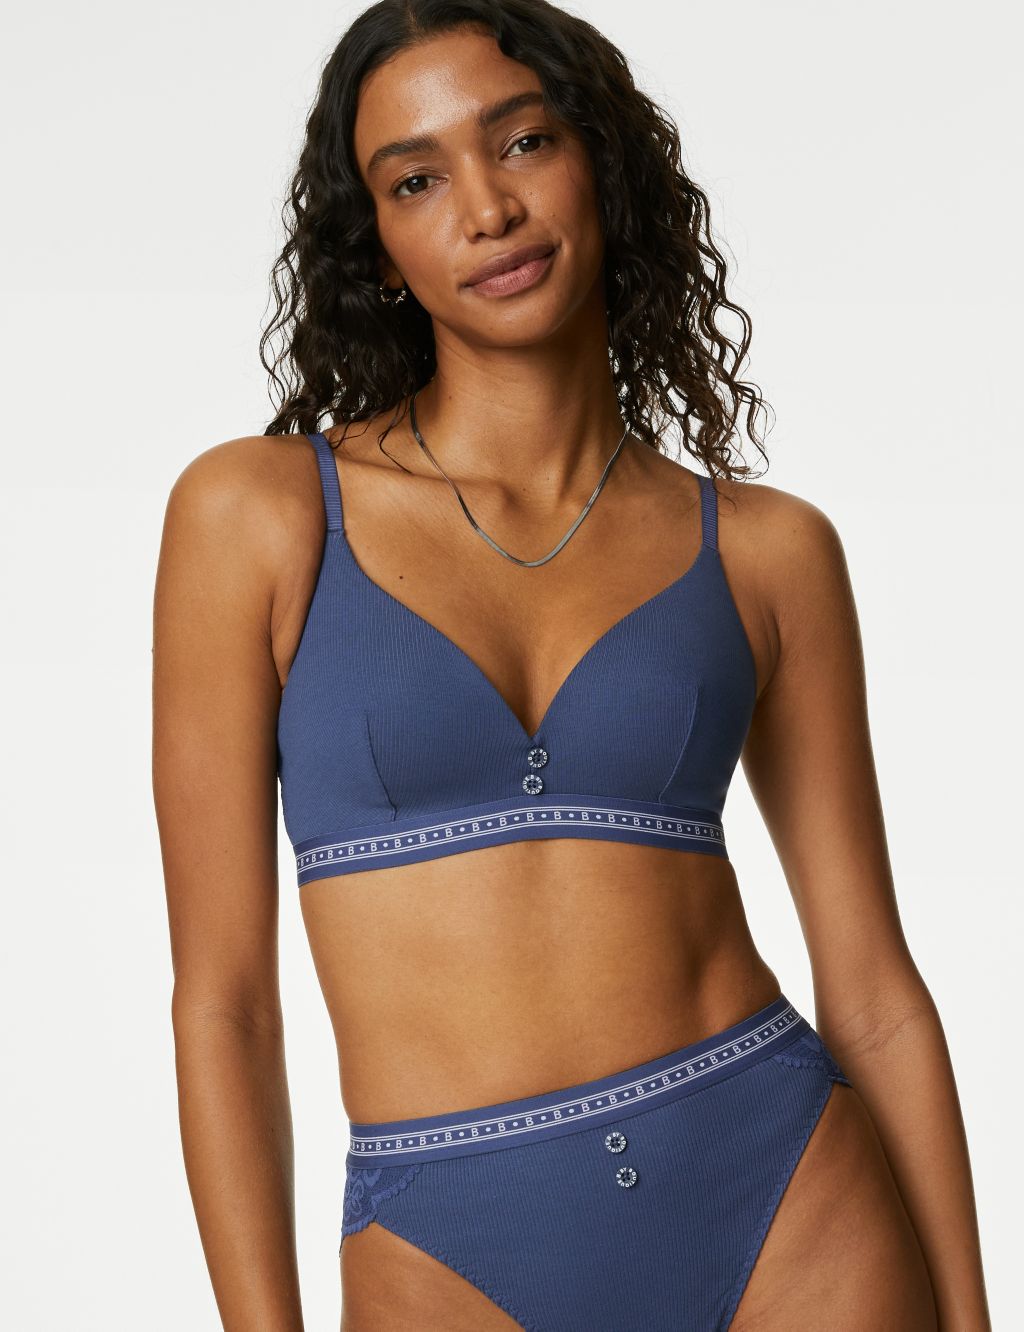 Blue Bras / Lingerie Tops: at $35.00+ over 2 products